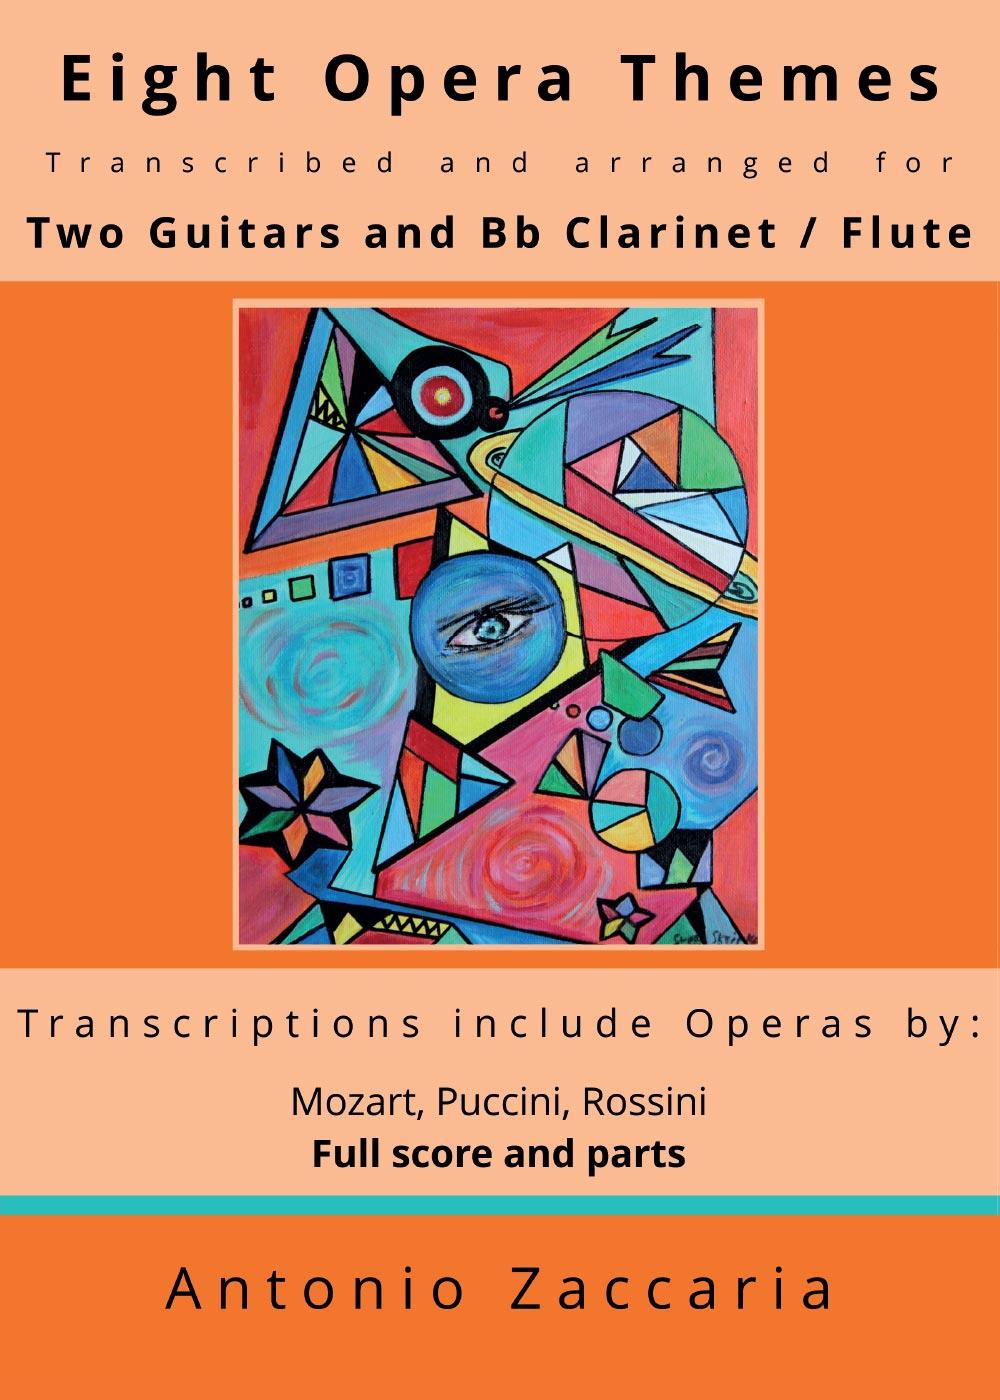 Eight opera themes transcribed and arranged for two guitars and Bb clarinet / flute